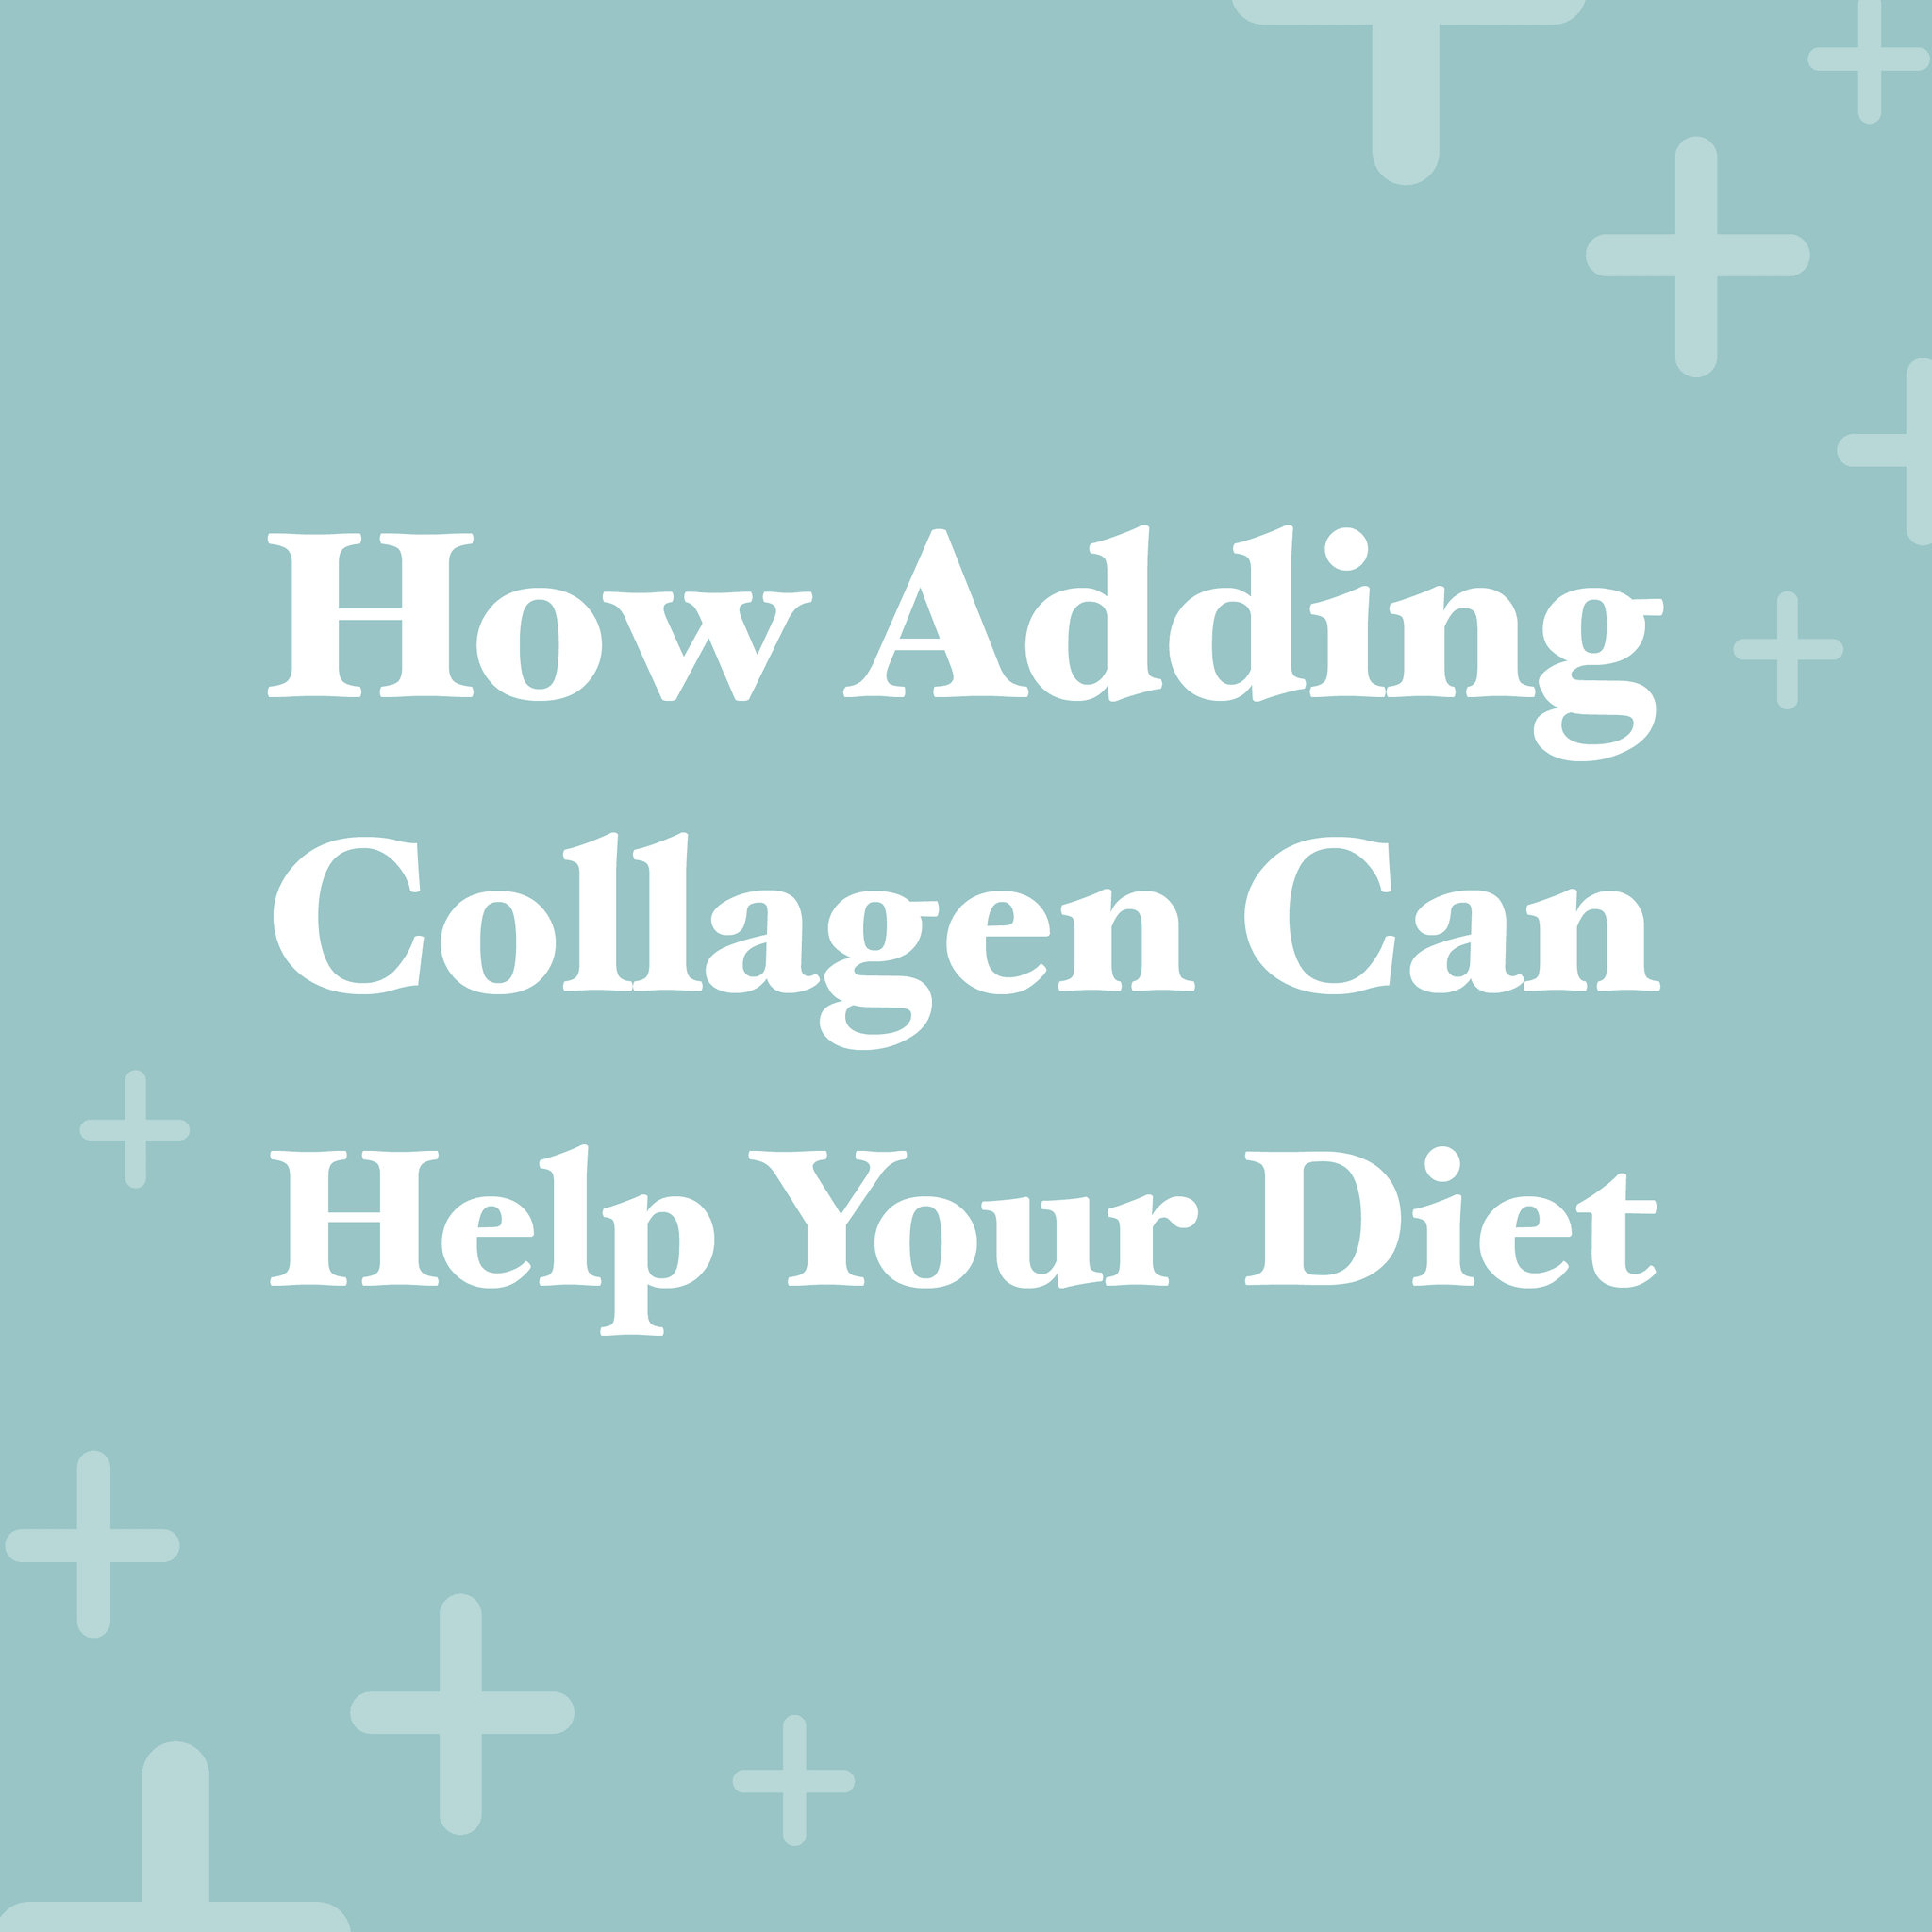 Adding collagen to your diet helps with anti-aging, caring for bones and connective tissue - AURA Nutrition